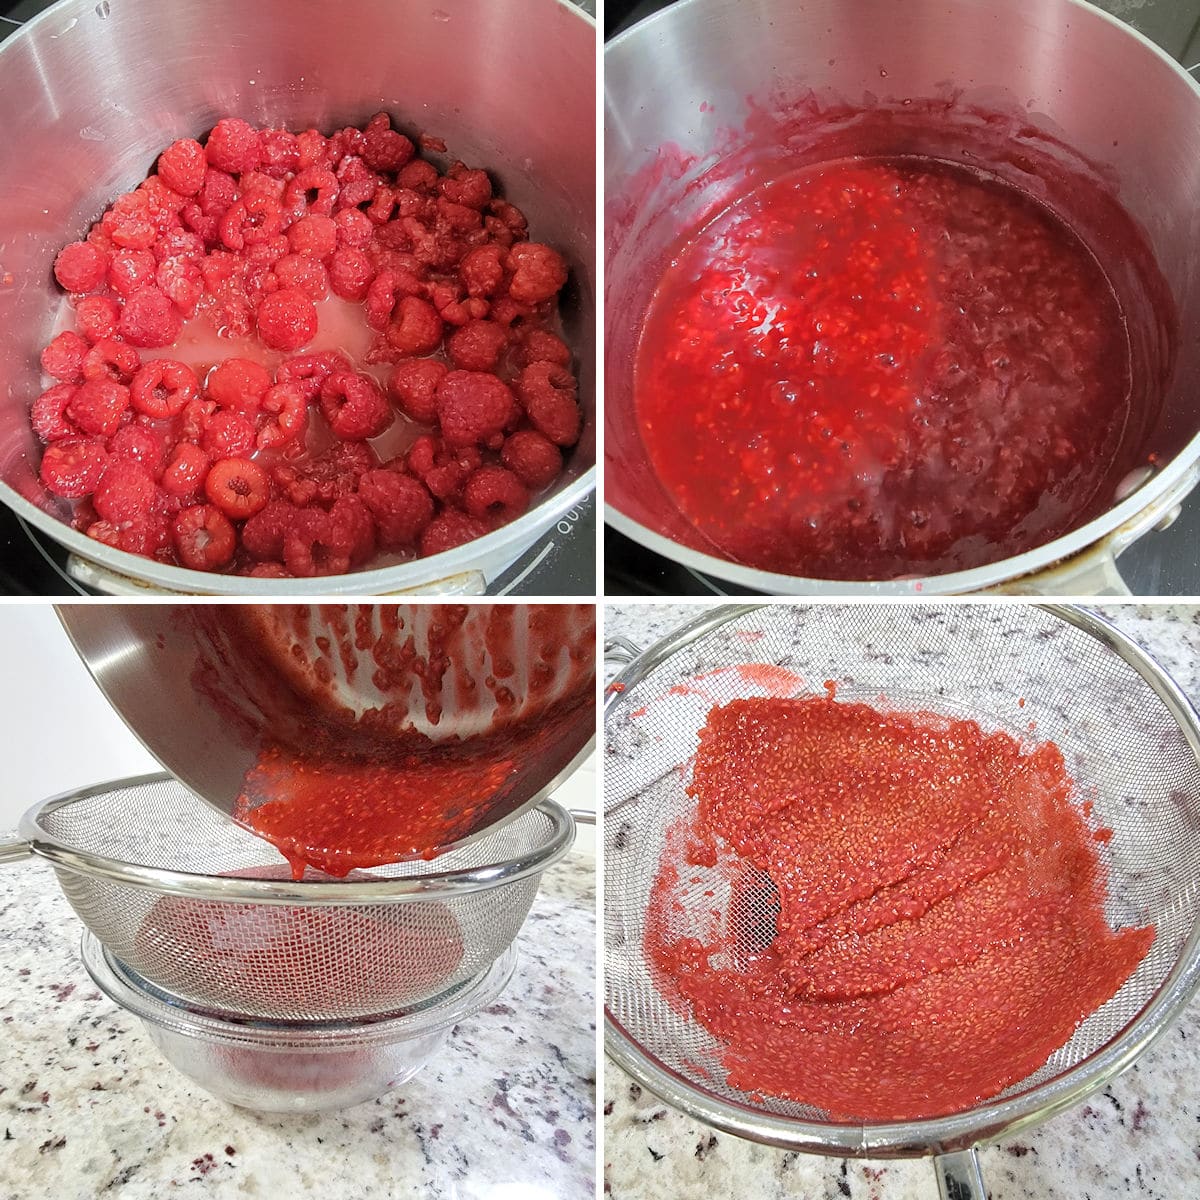 Cooking raspberry sauce and straining out the seeds.